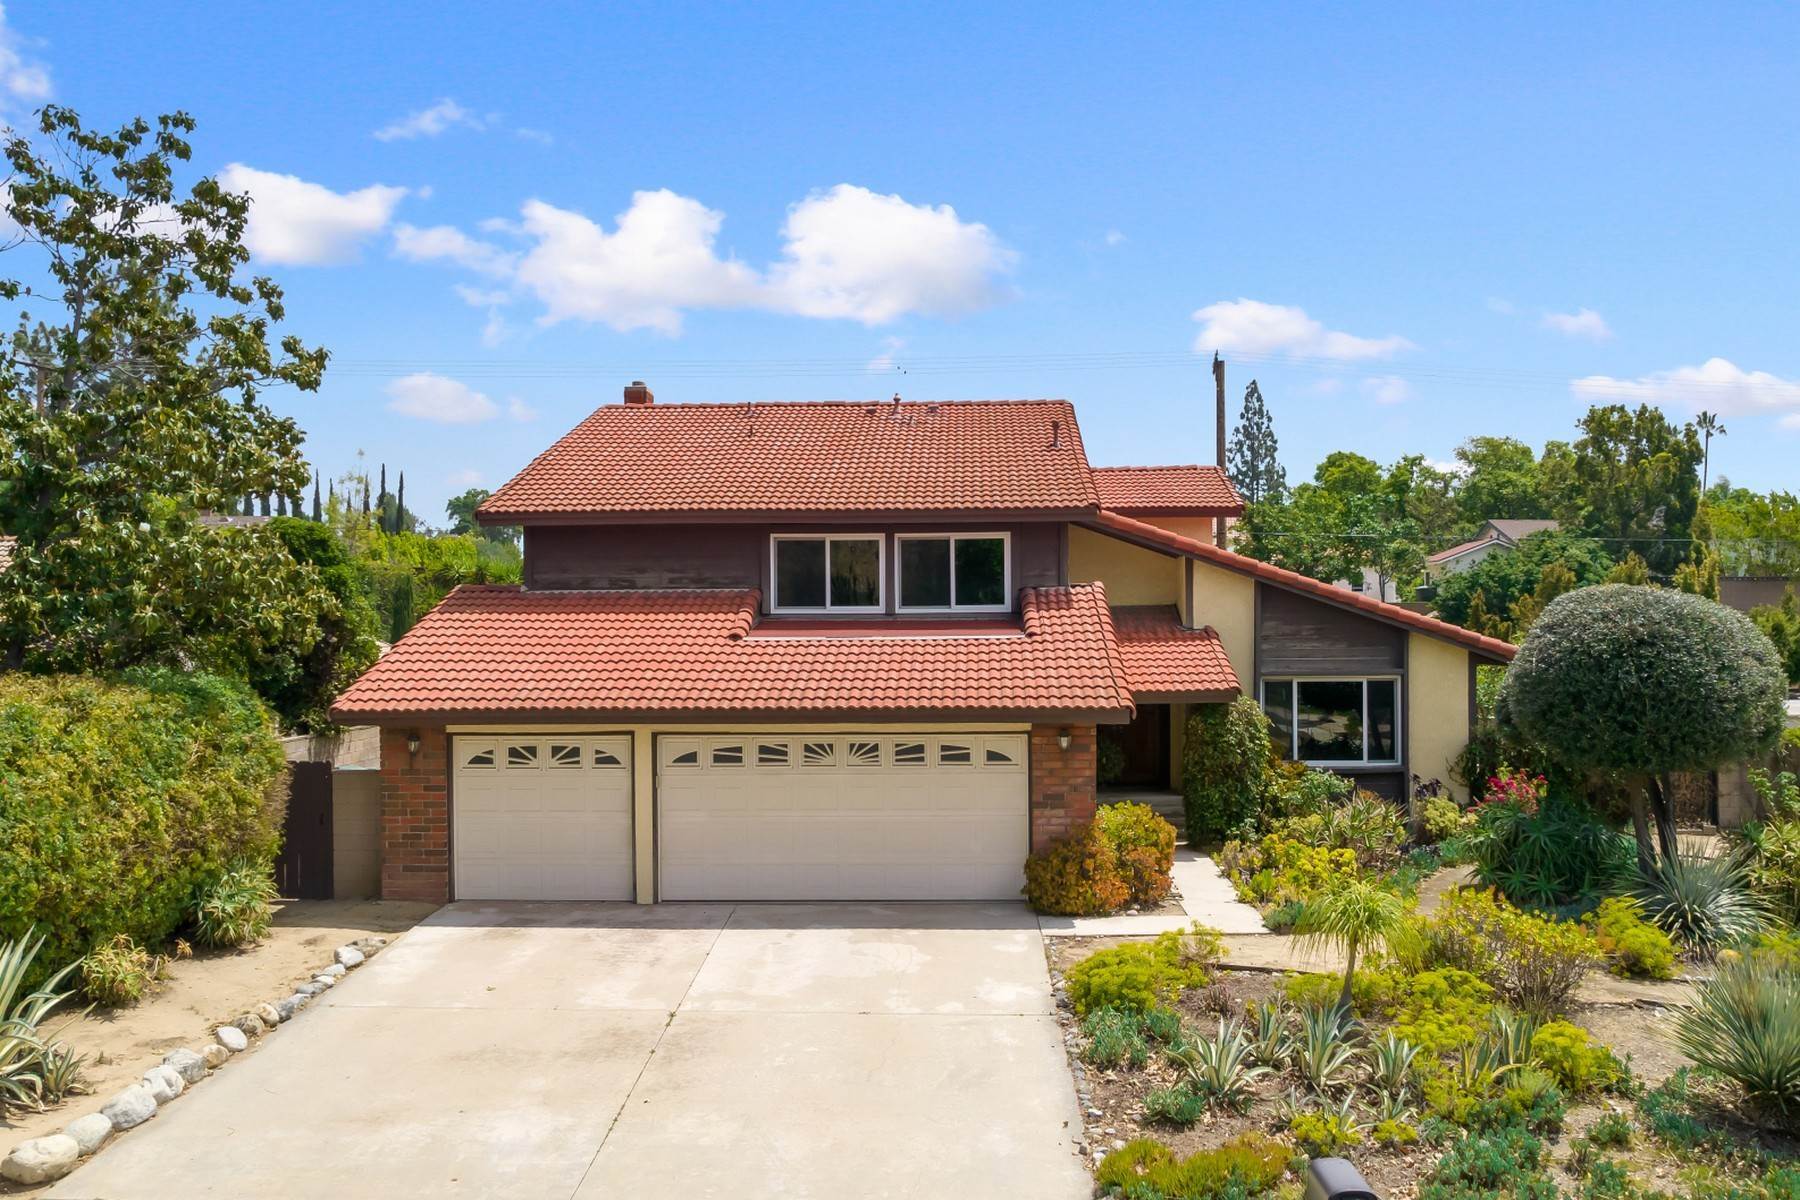 Single Family Homes for Sale at 170 Armstrong Drive, Claremont, California 91711 170 Armstrong Drive Claremont, California 91711 United States